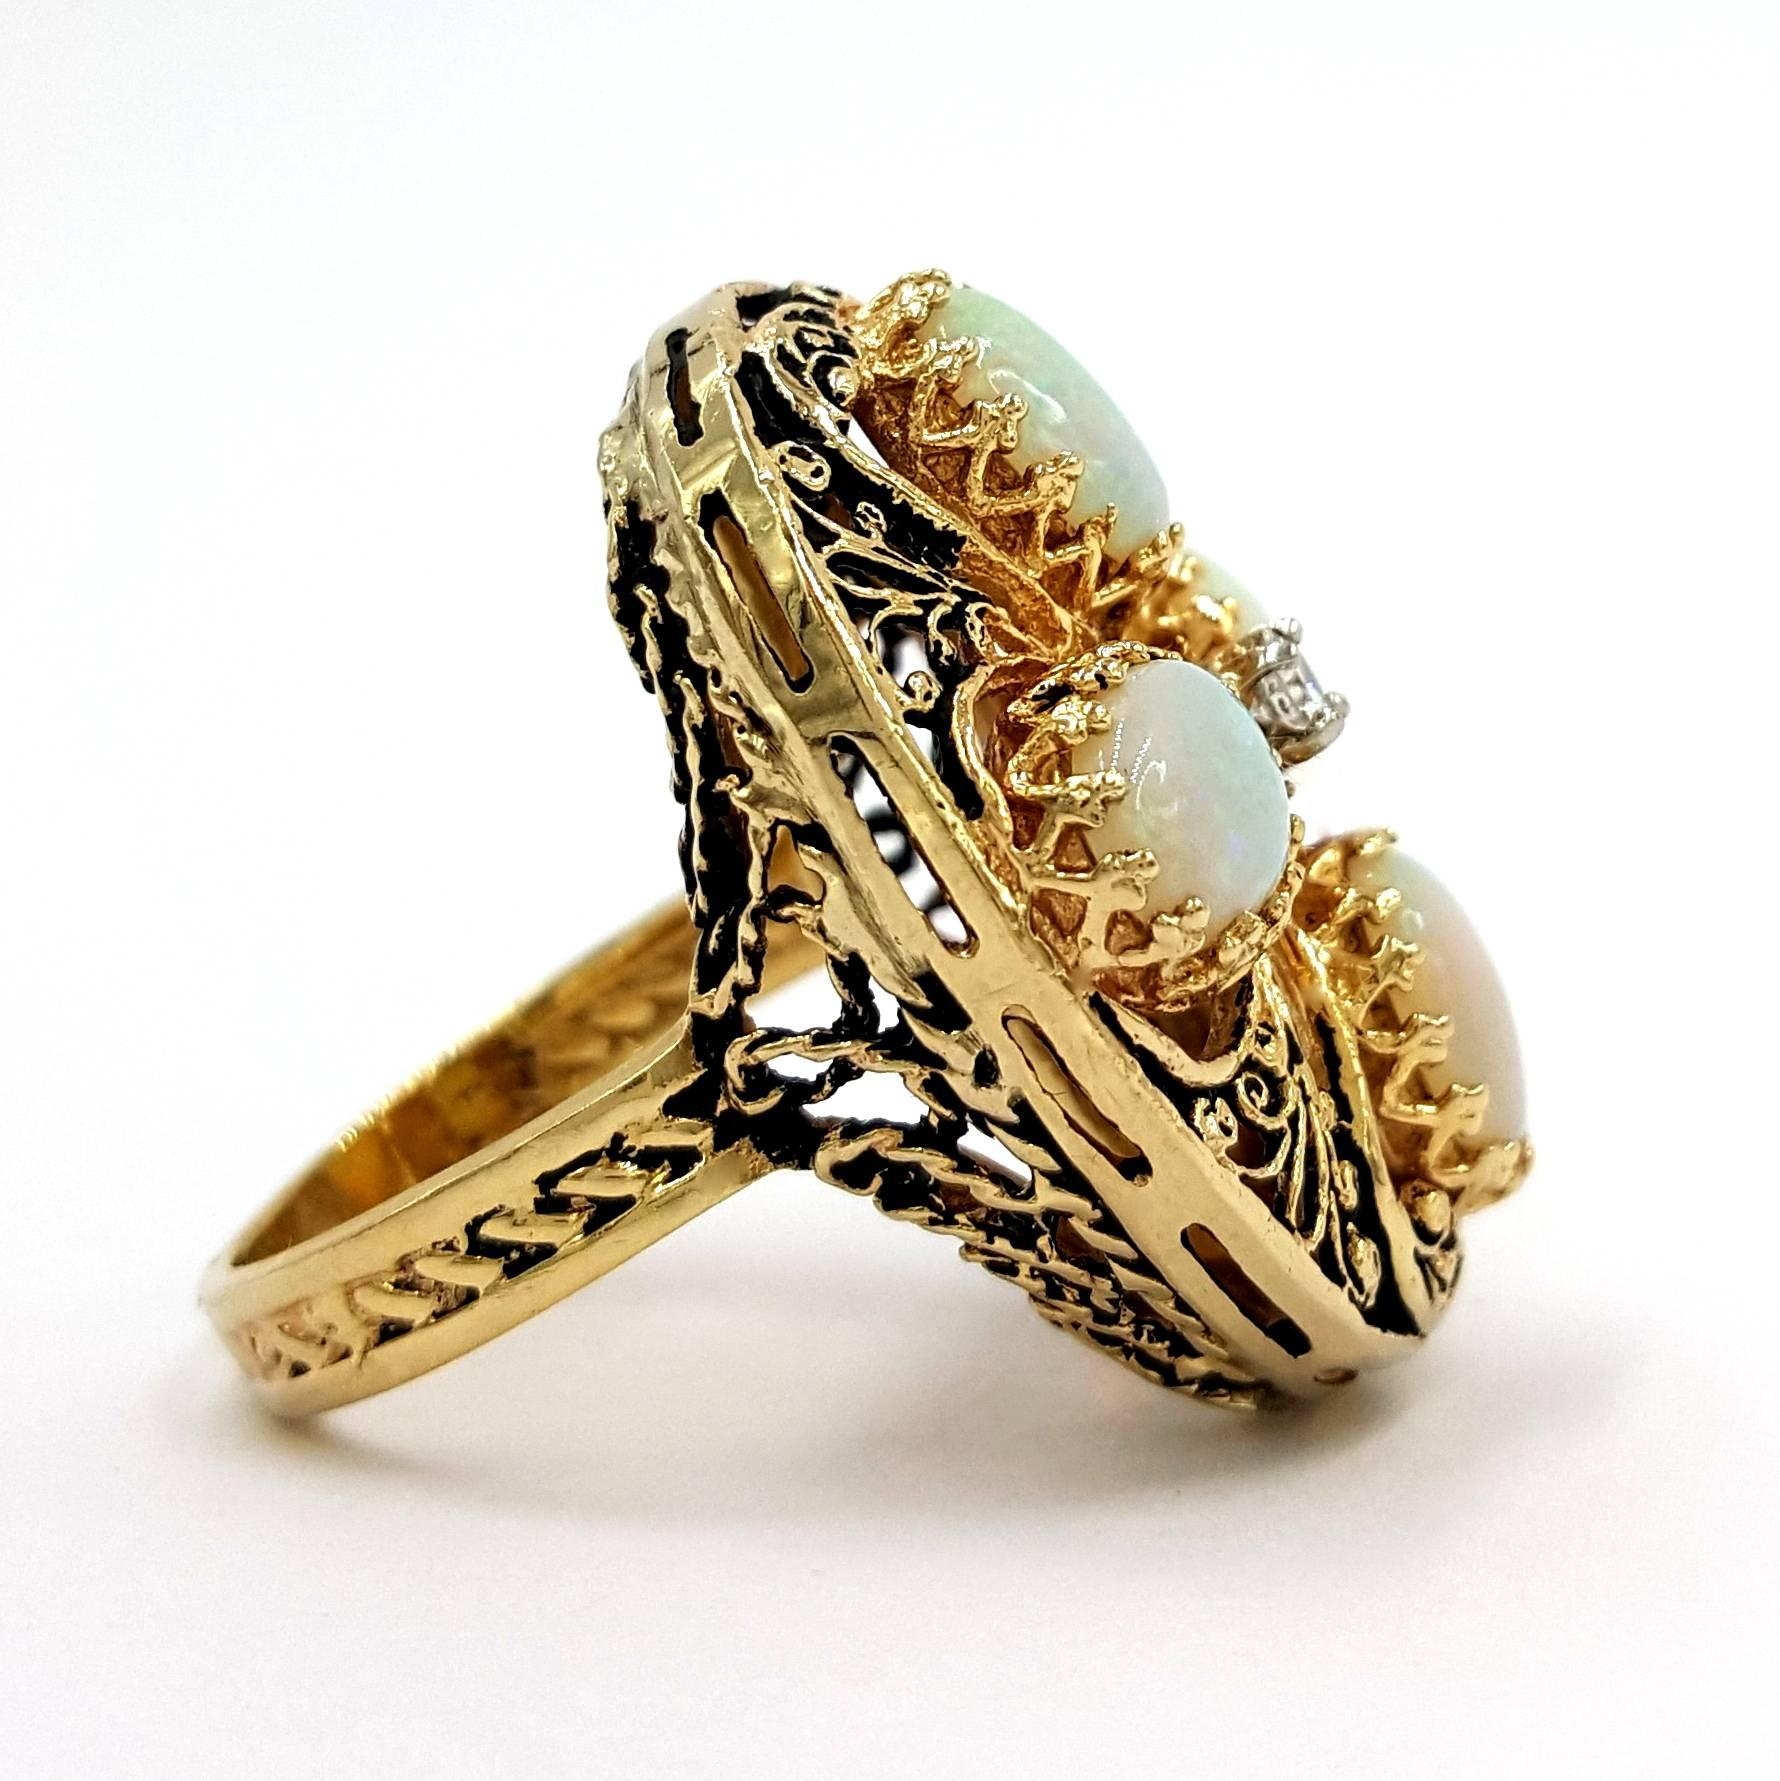 Ornate circa 1970's 18kt Yellow Gold Filigree Ethiopian Opal Exotic Diamond Ring In Excellent Condition For Sale In Scottsdale, AZ